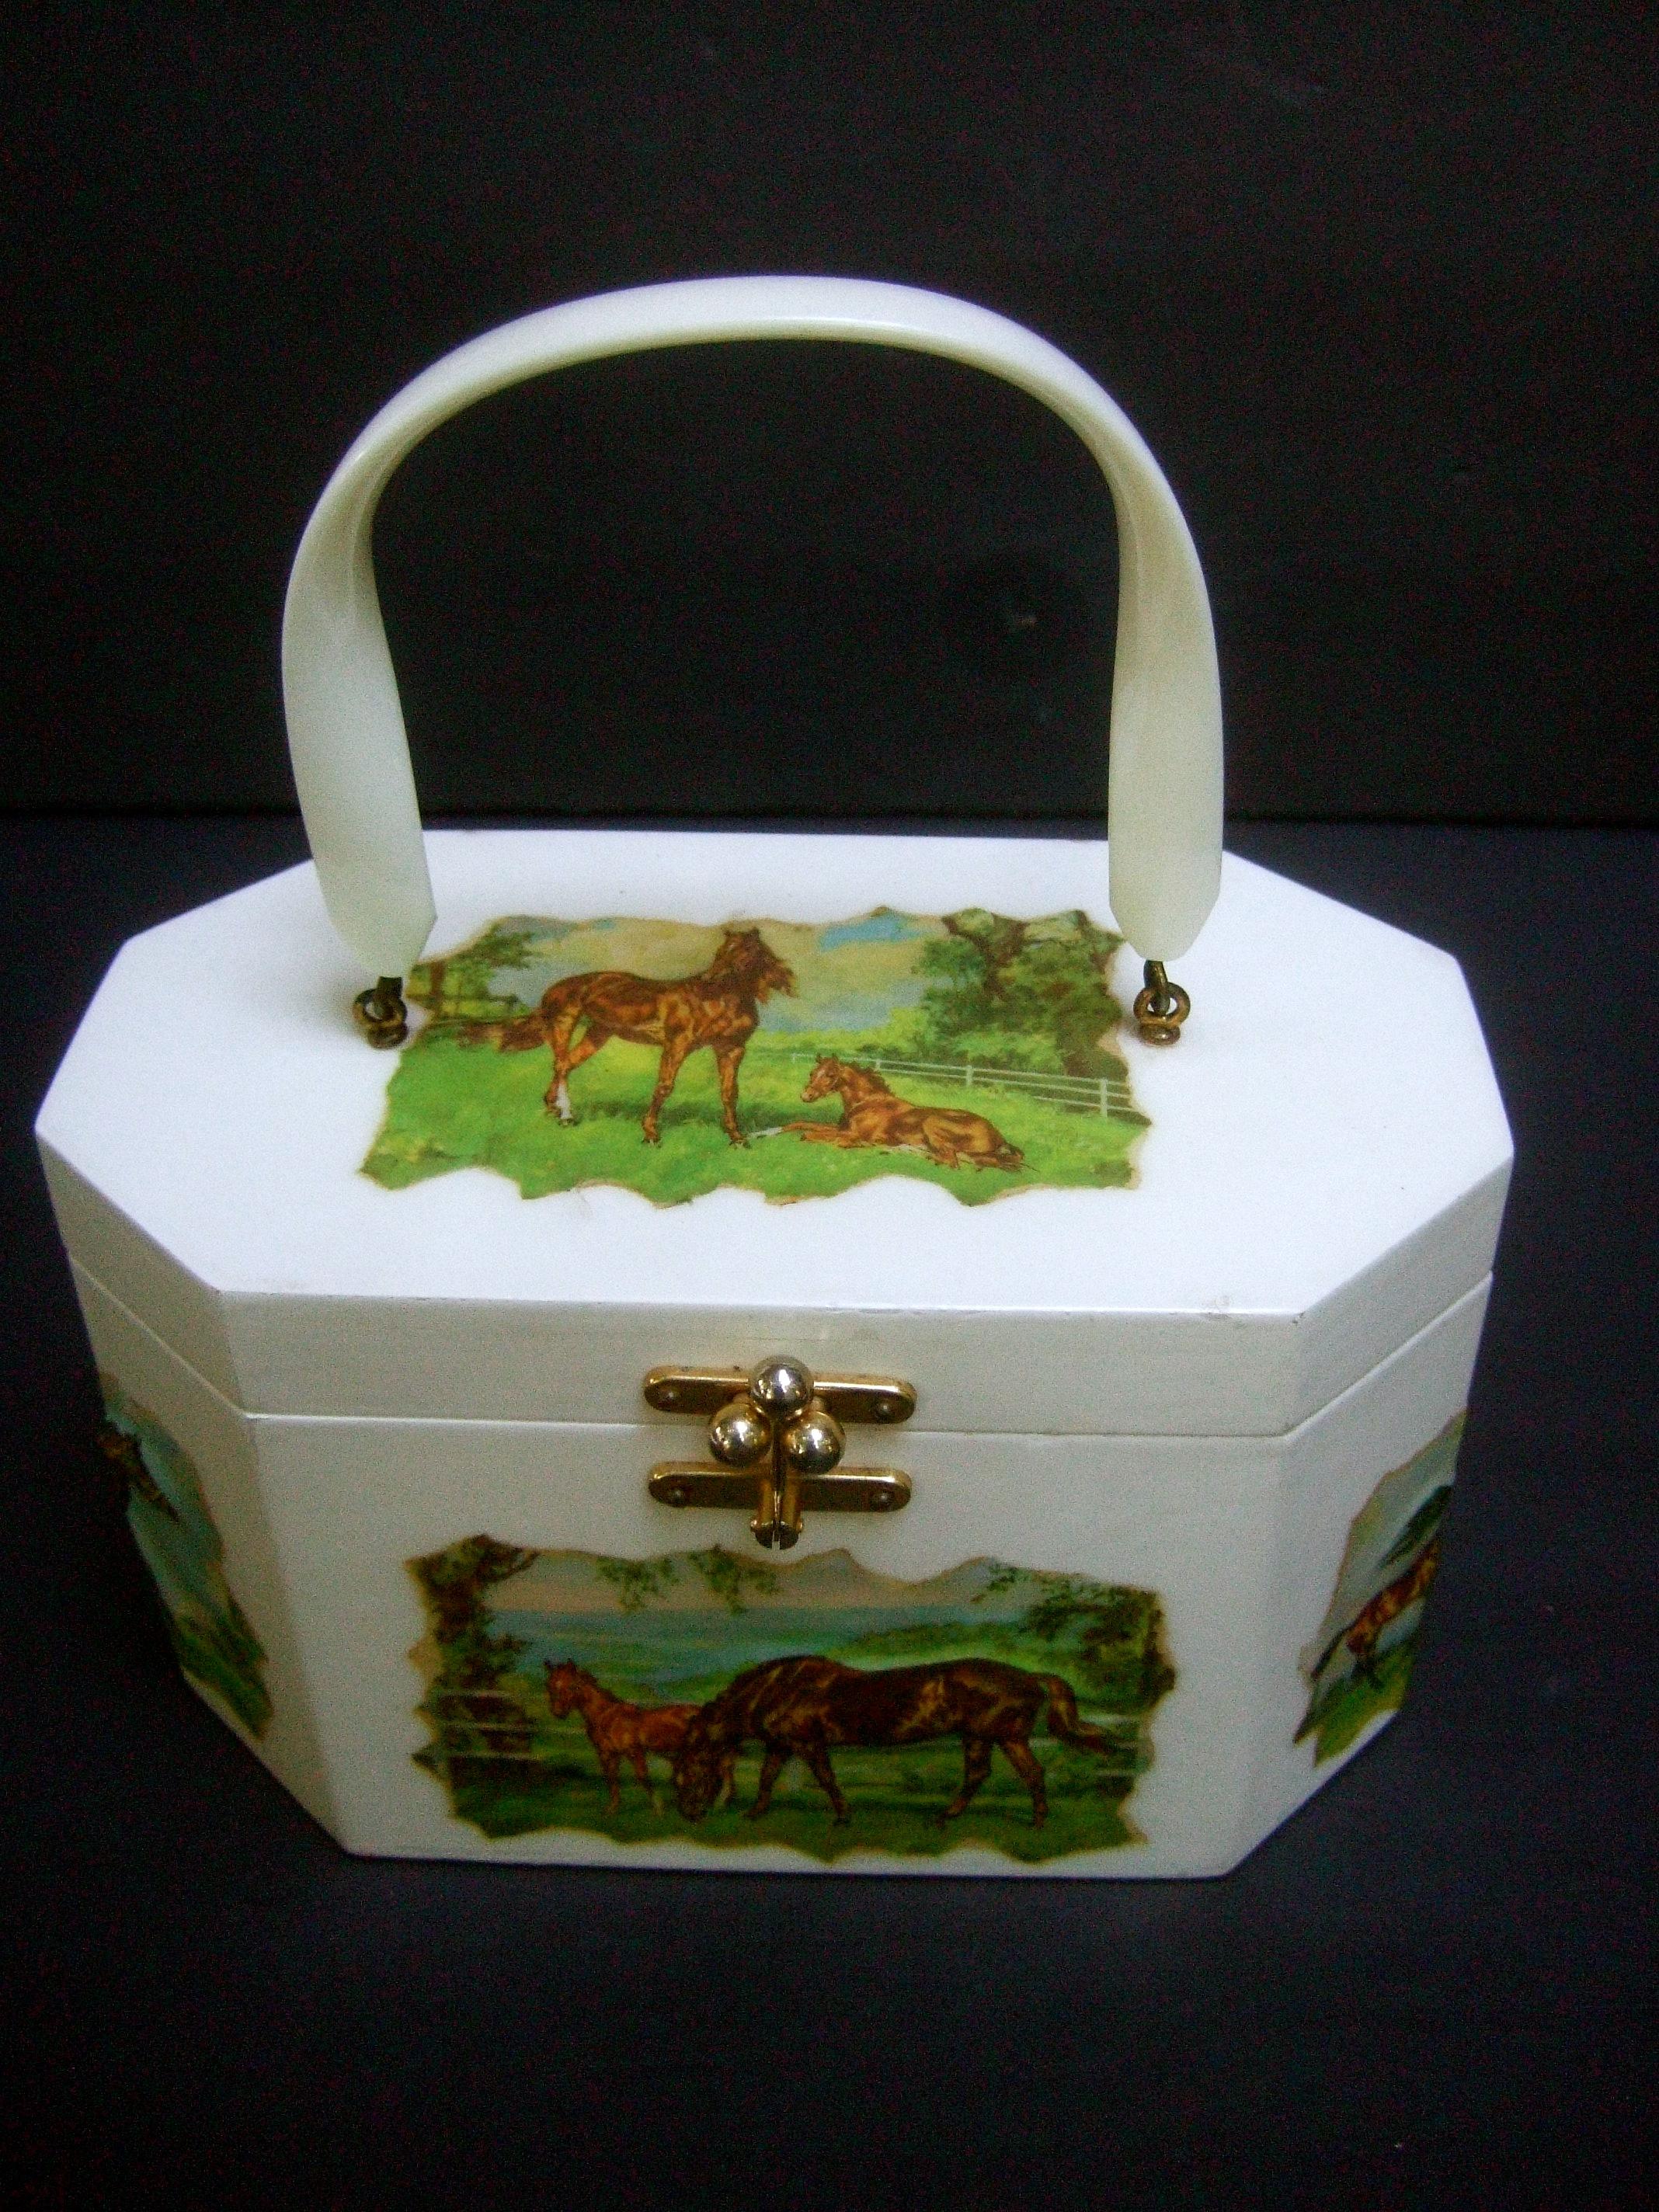 1970s Equine decoupage box purse designed by Annie Laurie Palm Beach 
The unique white enamel wood box purse is decorated with a collection
of decoupage horse scenes in a myriad of outdoor settings 

The octagon-shaped purse is carried with a white